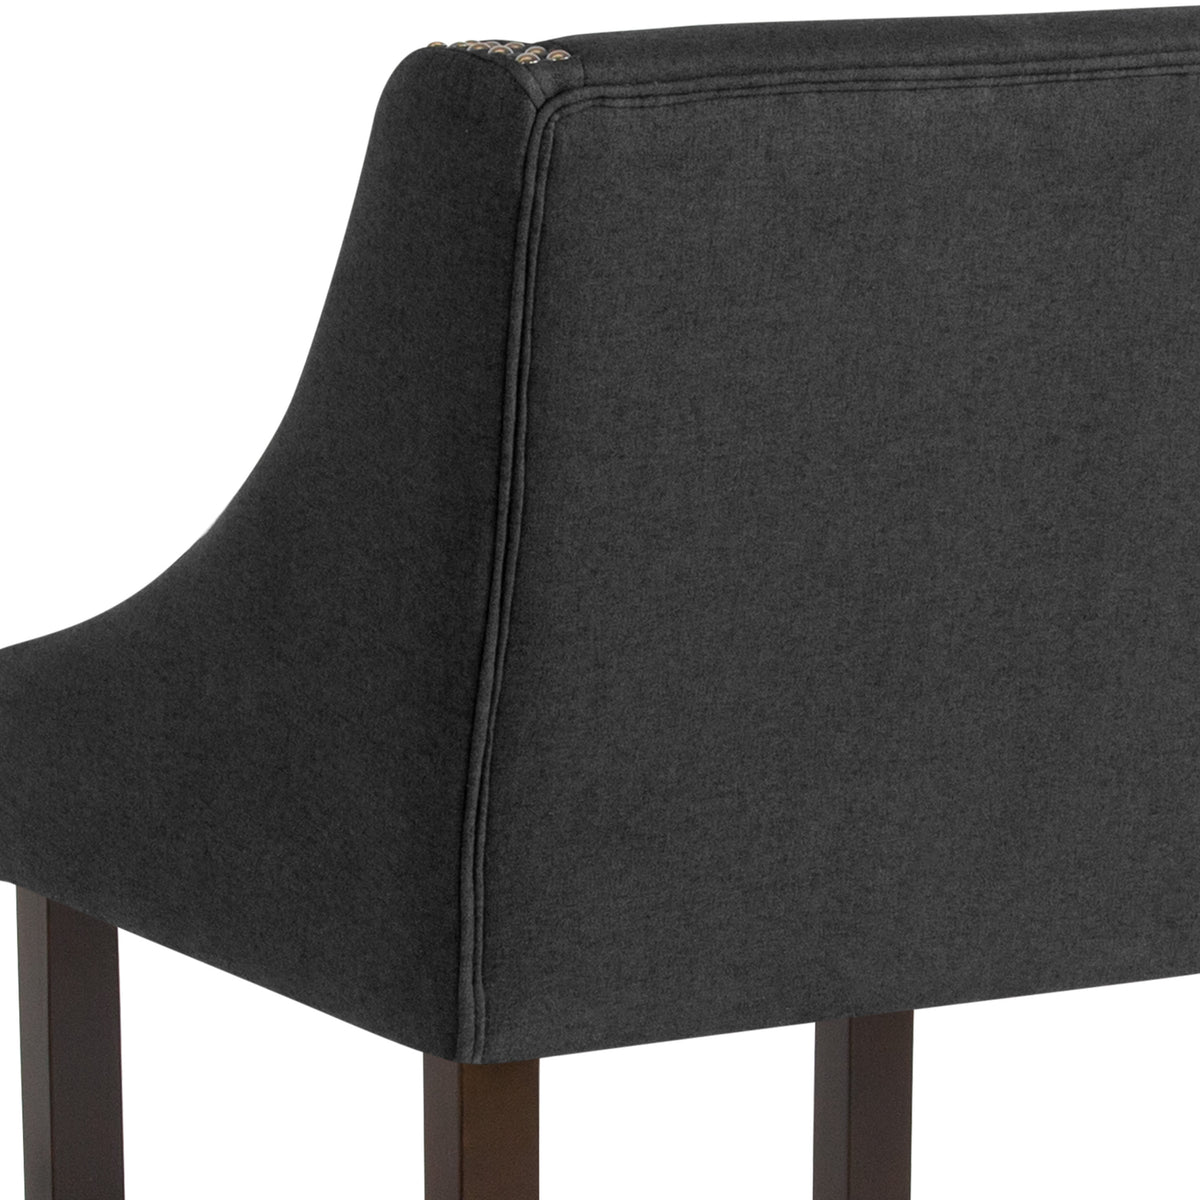 Charcoal Fabric |#| 30inch High Transitional Walnut Barstool with Accent Nail Trim in Charcoal Fabric